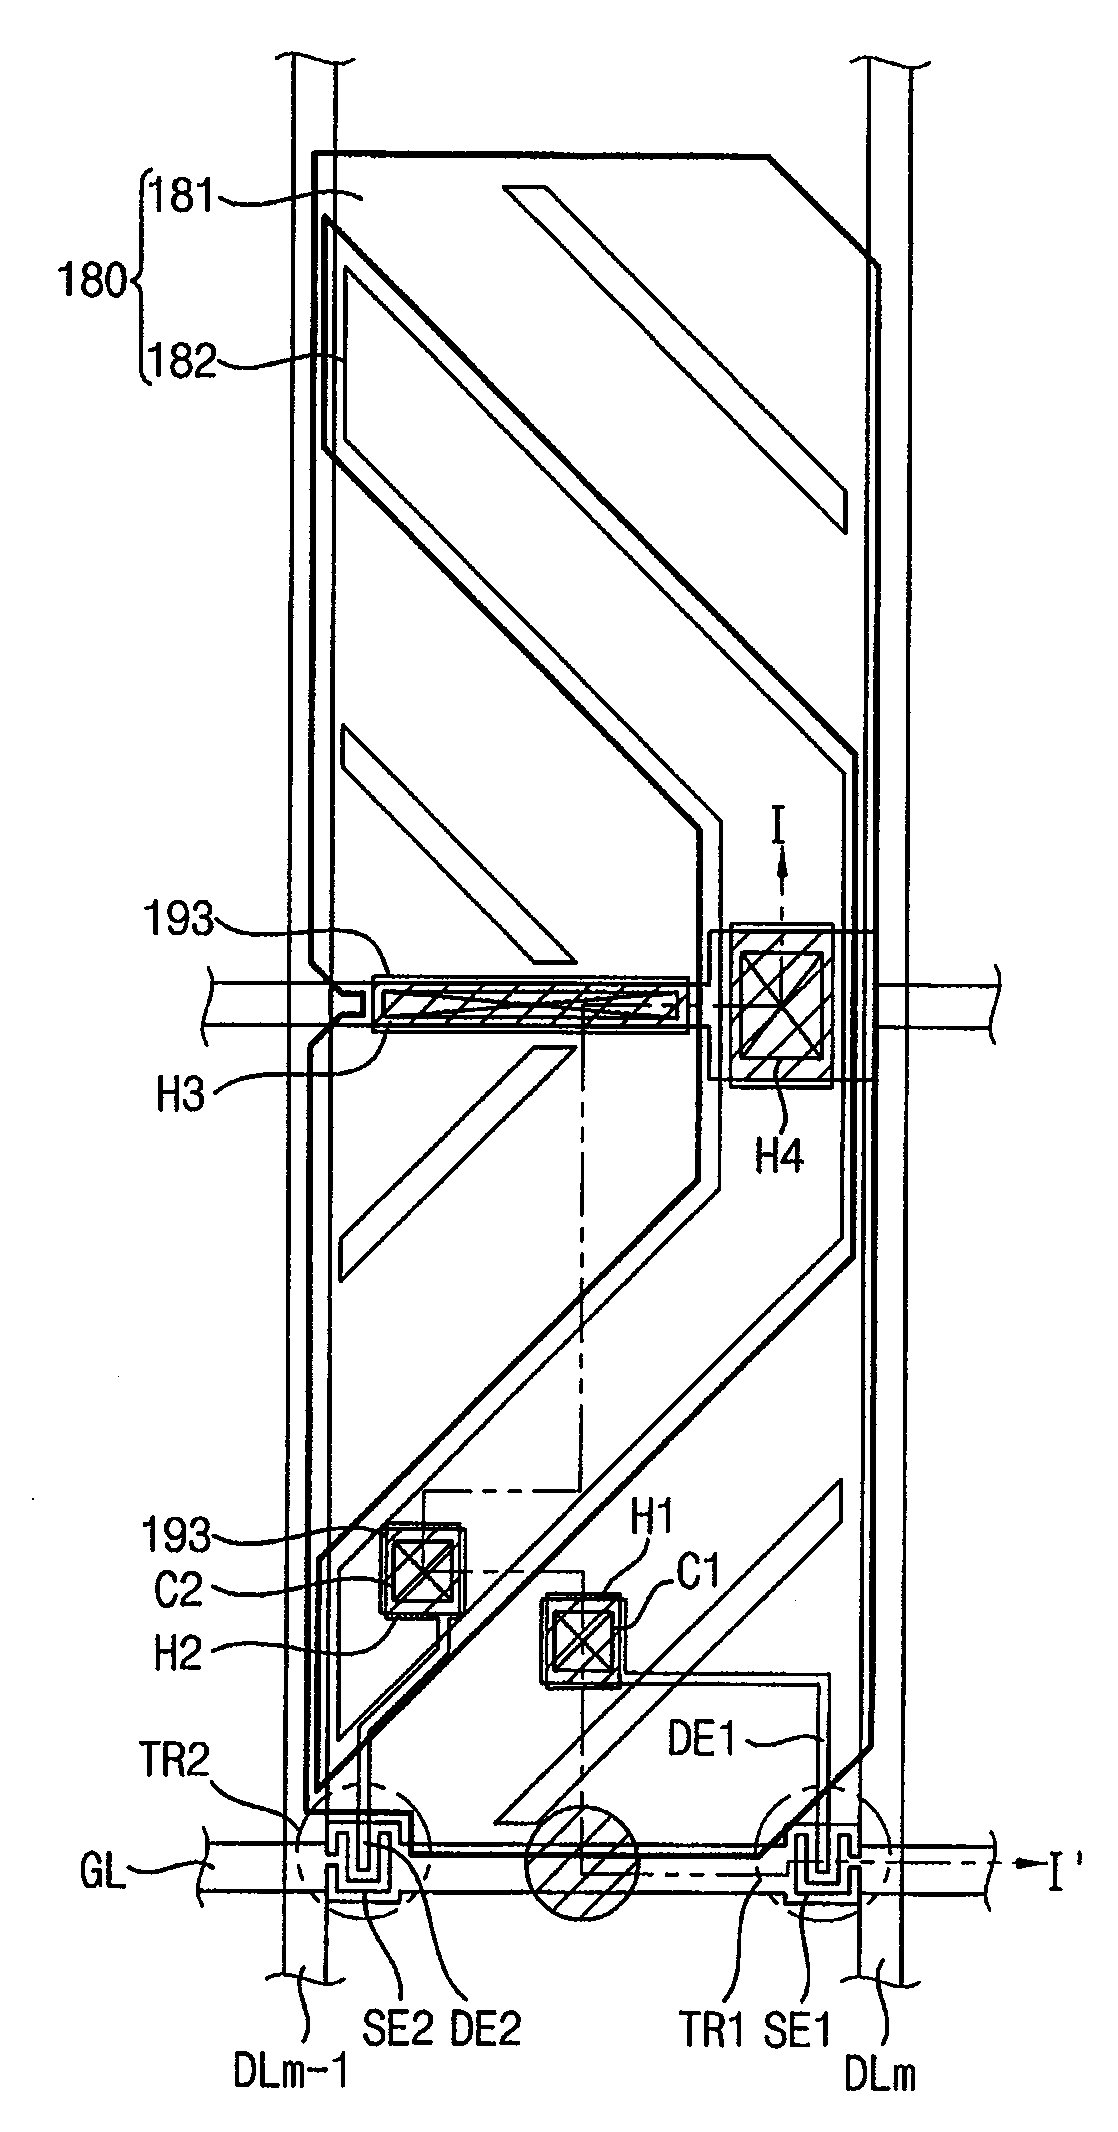 Display Substrate, Method Of Manufacturing The Same And Liquid Crystal Display Panel Having The Display Substrate